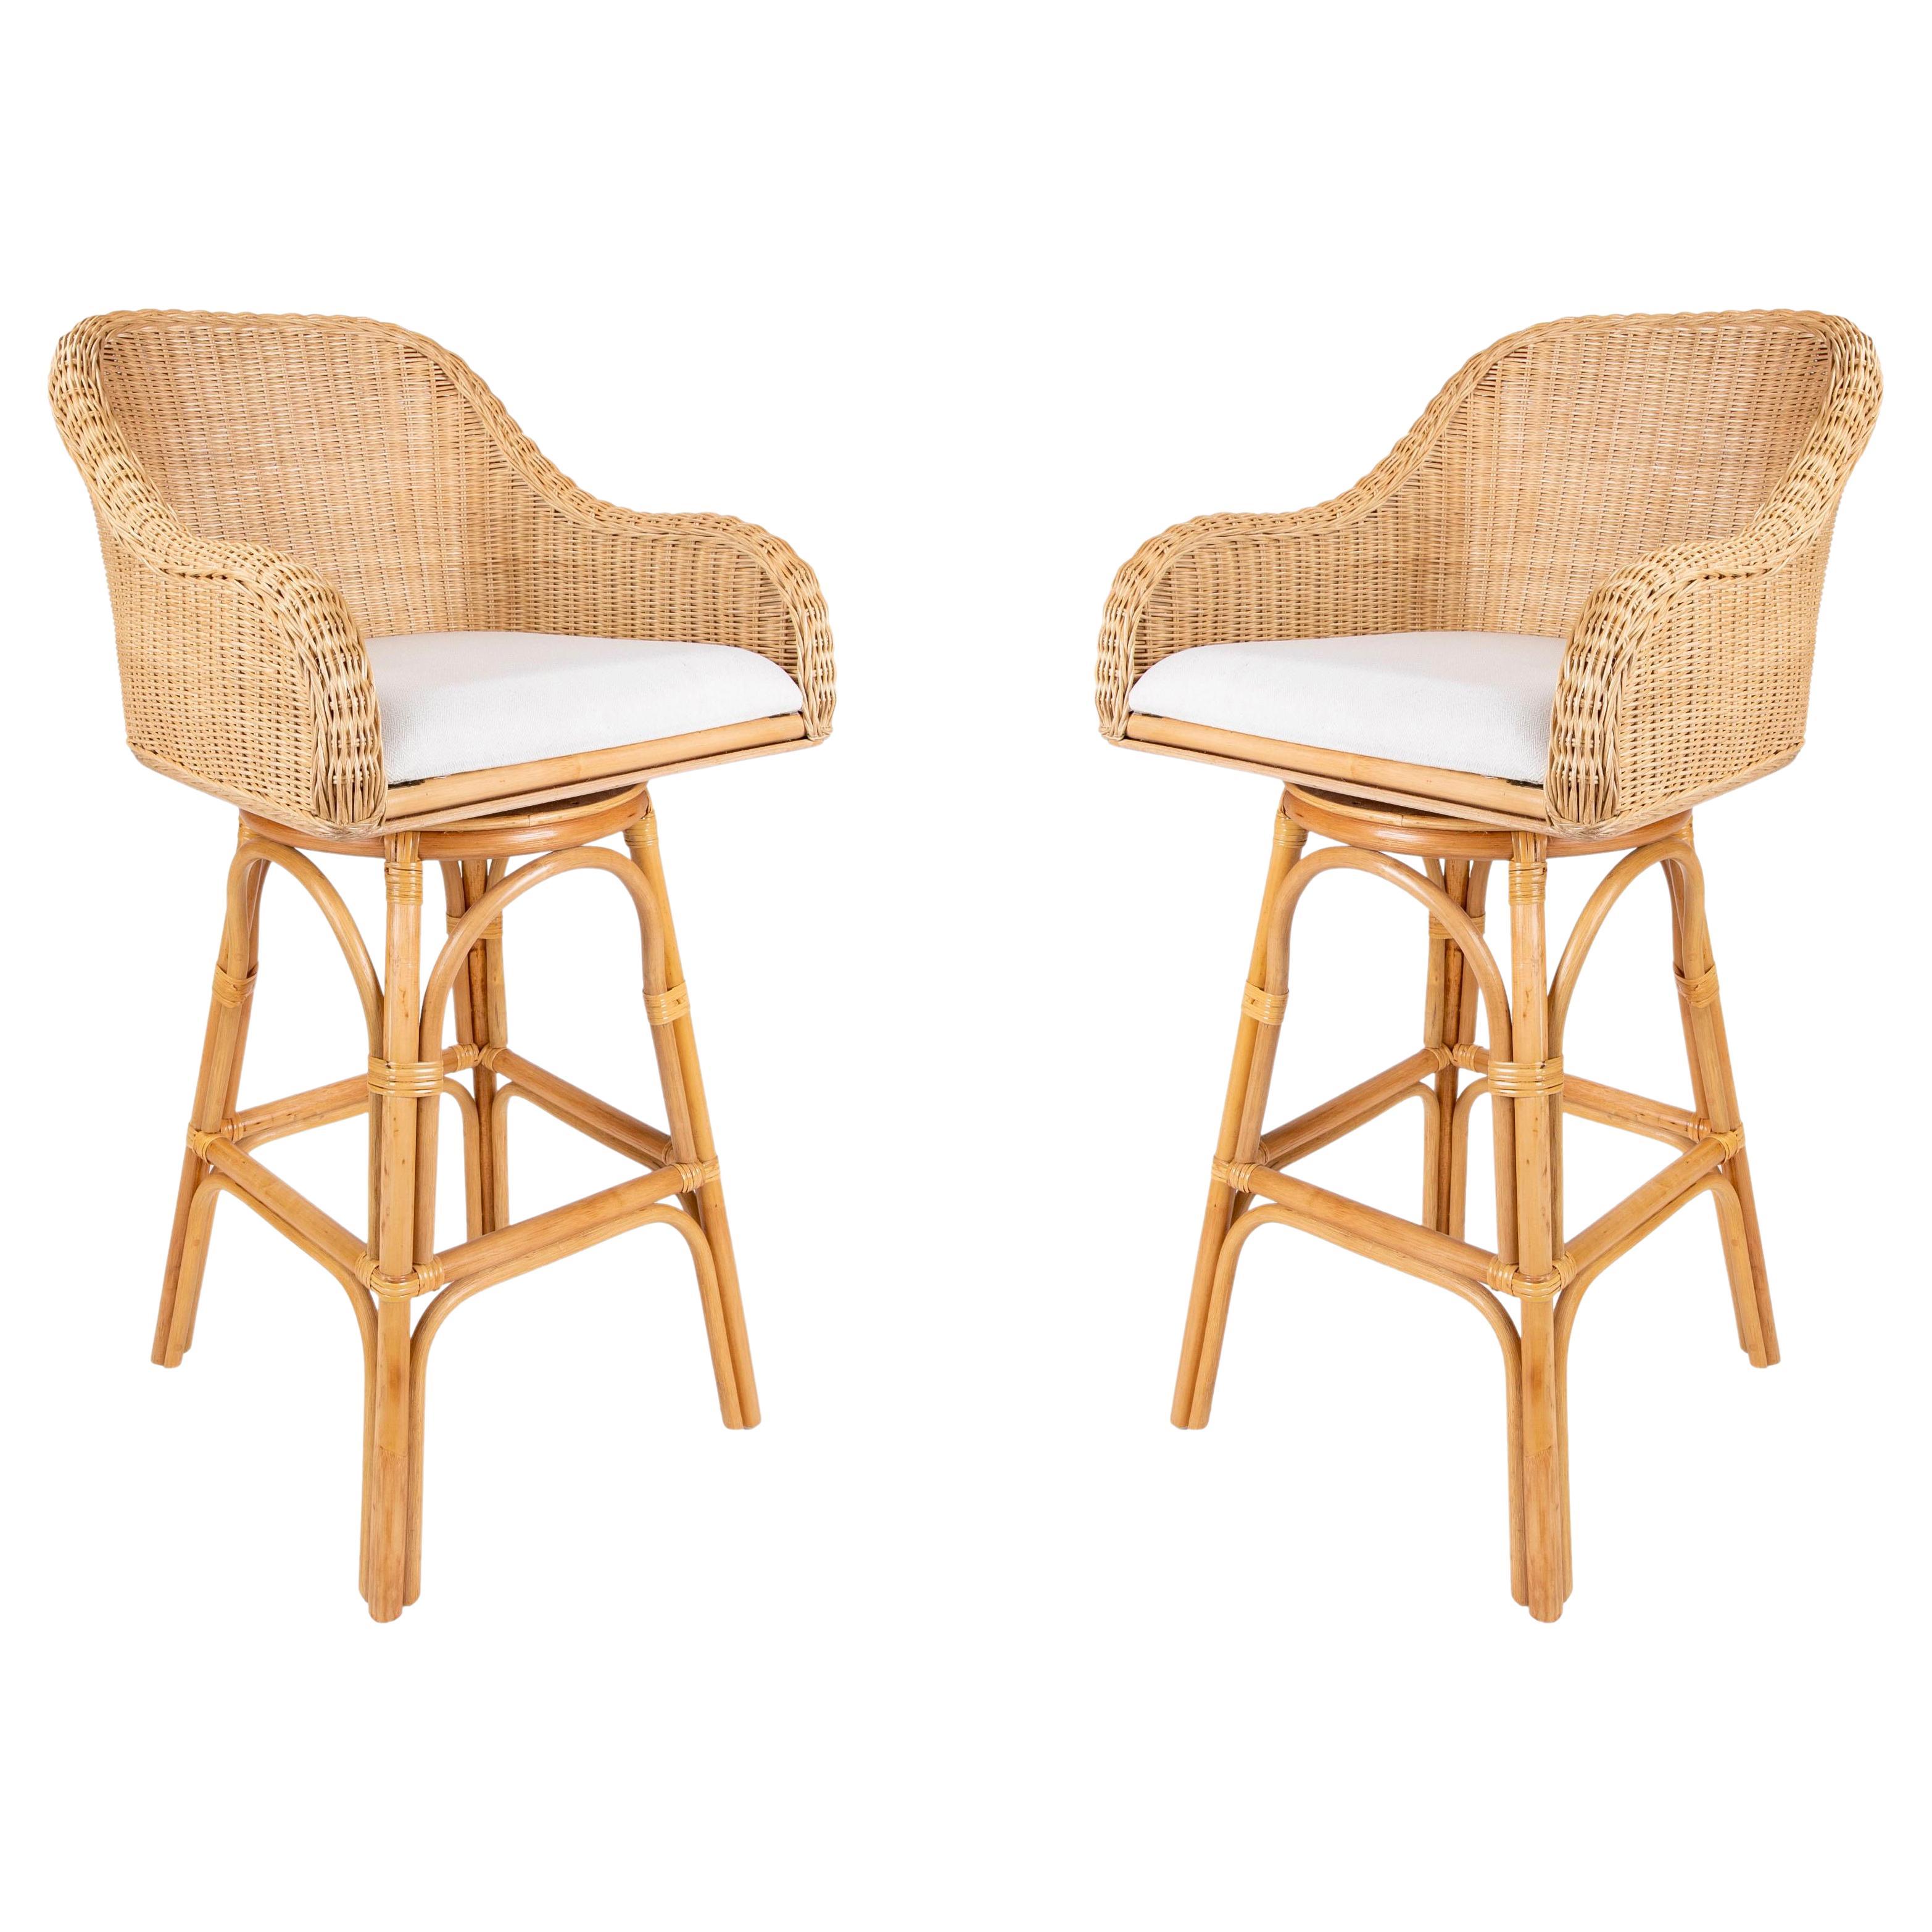 Pair of Two Upholstered Rattan and Wicker Bar stools with Sideways Movement For Sale